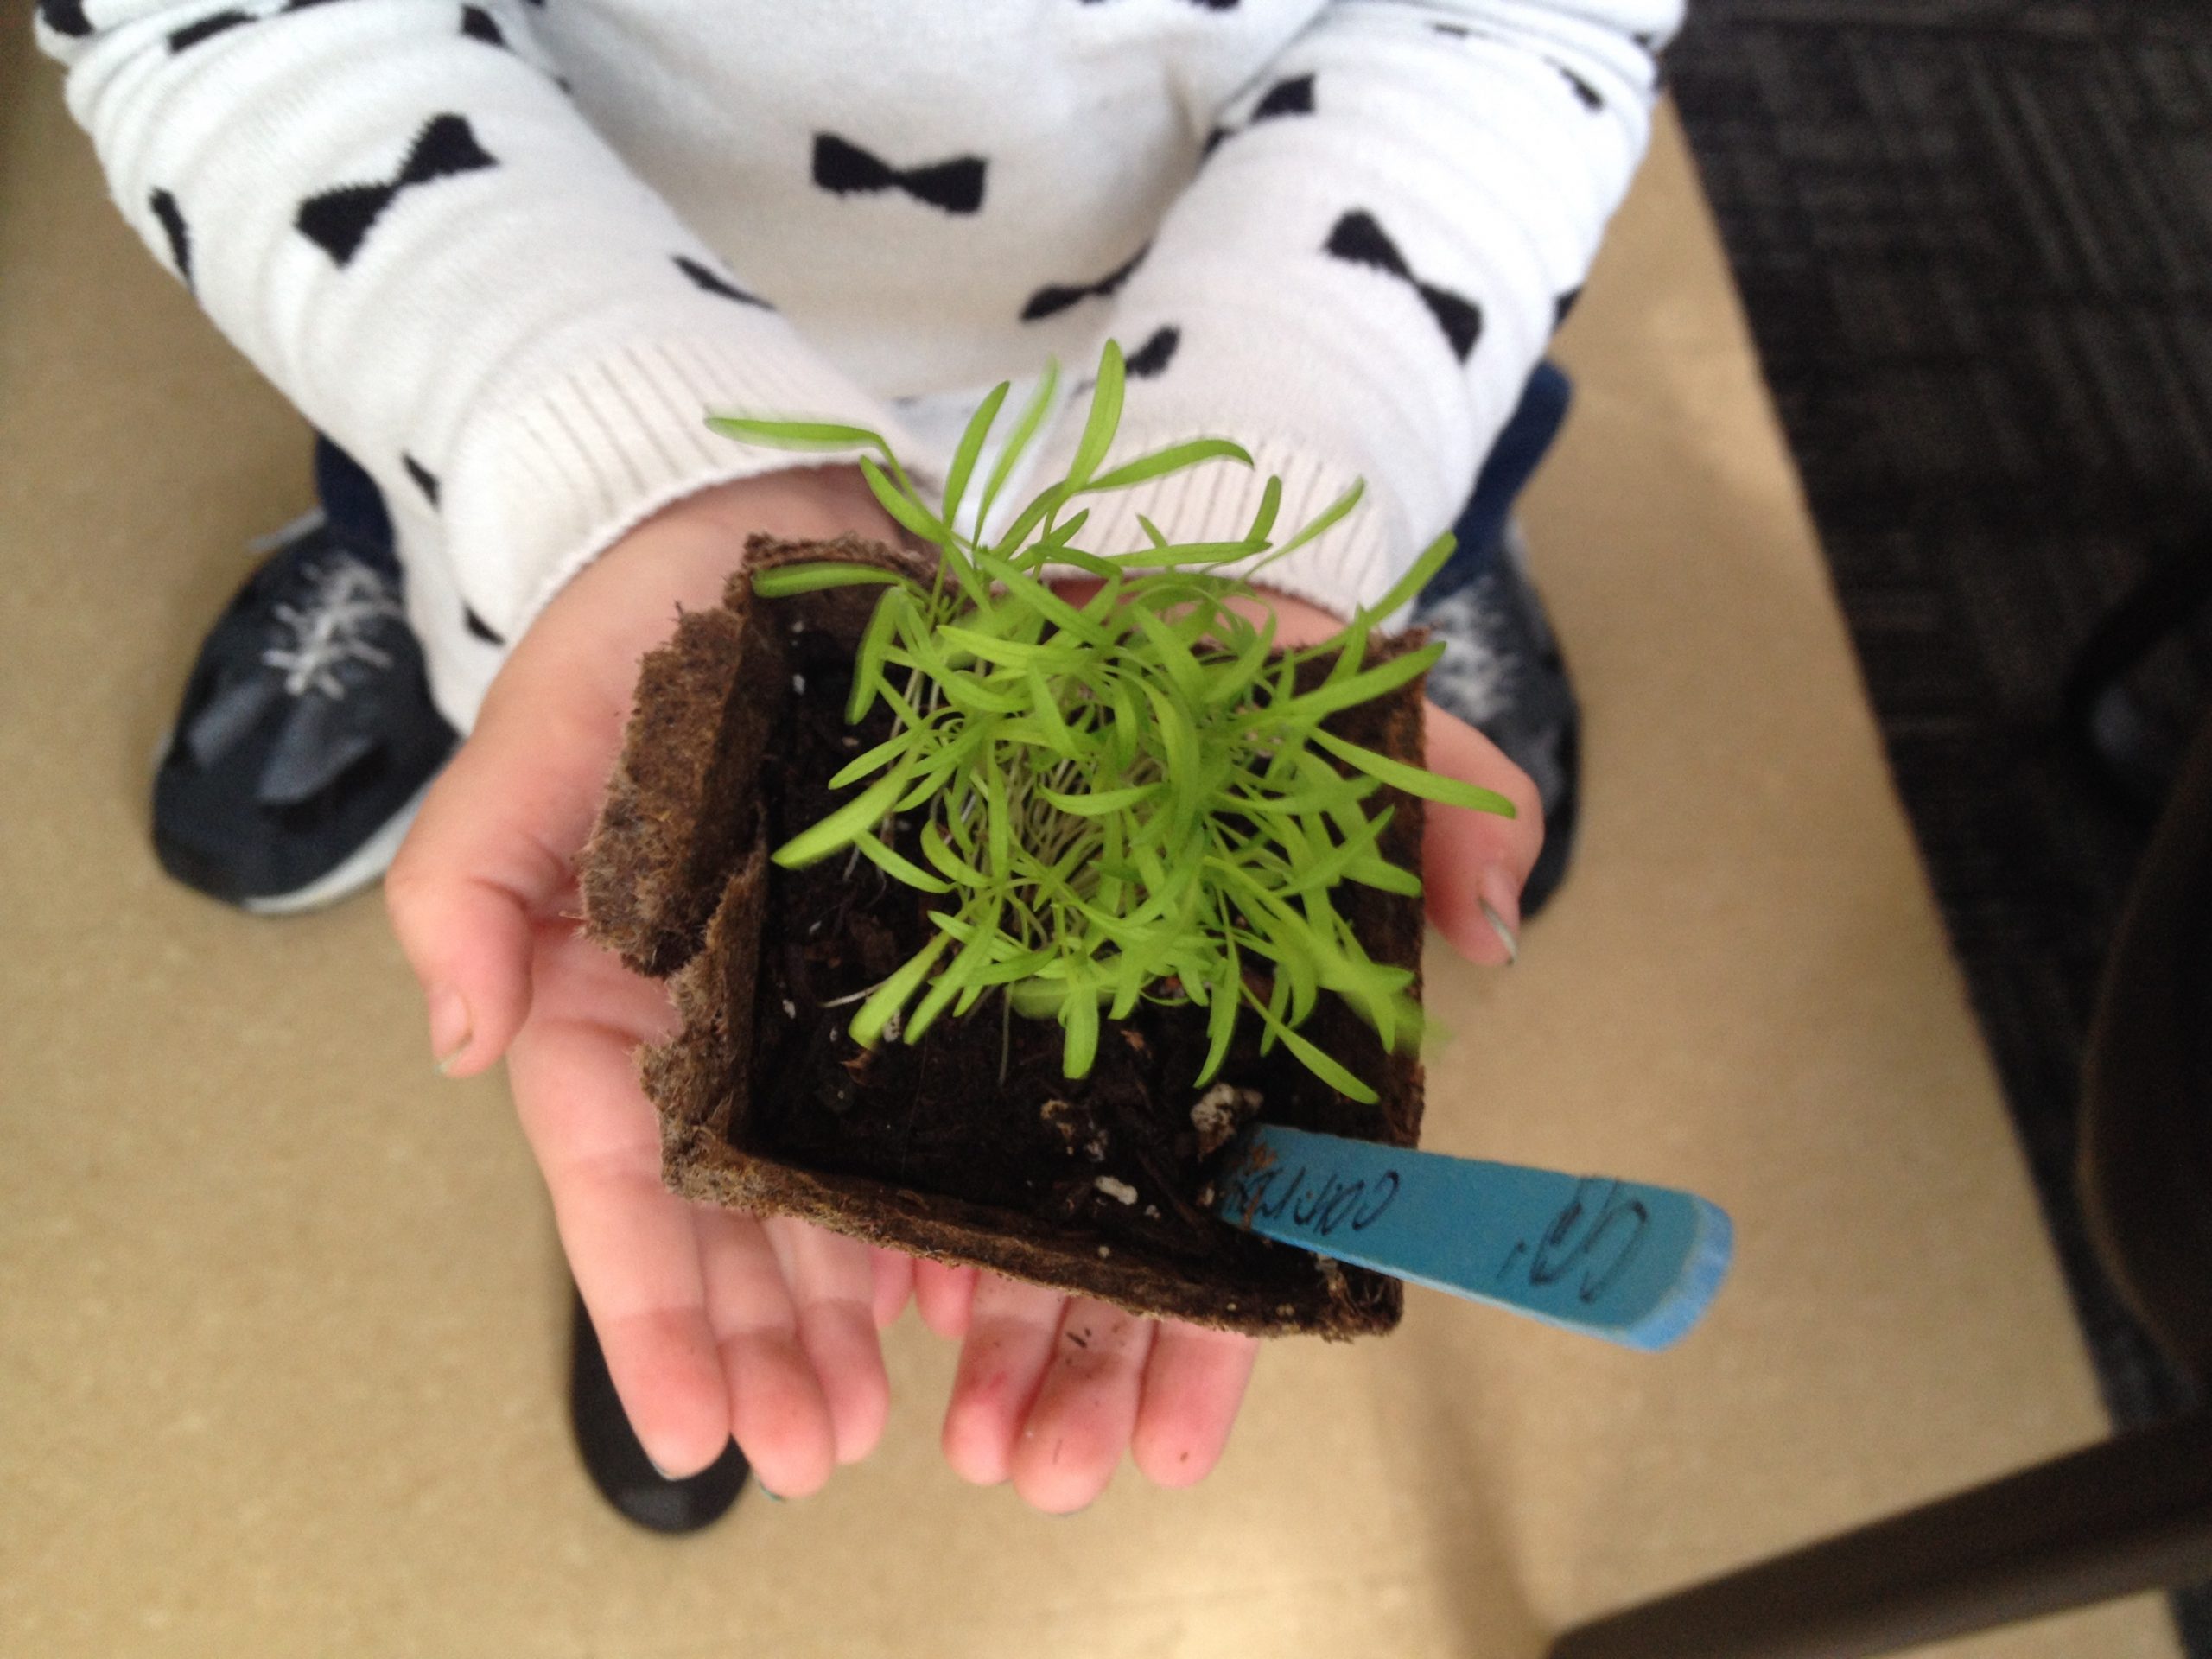 Child's hands holing a seedling in a small pot.